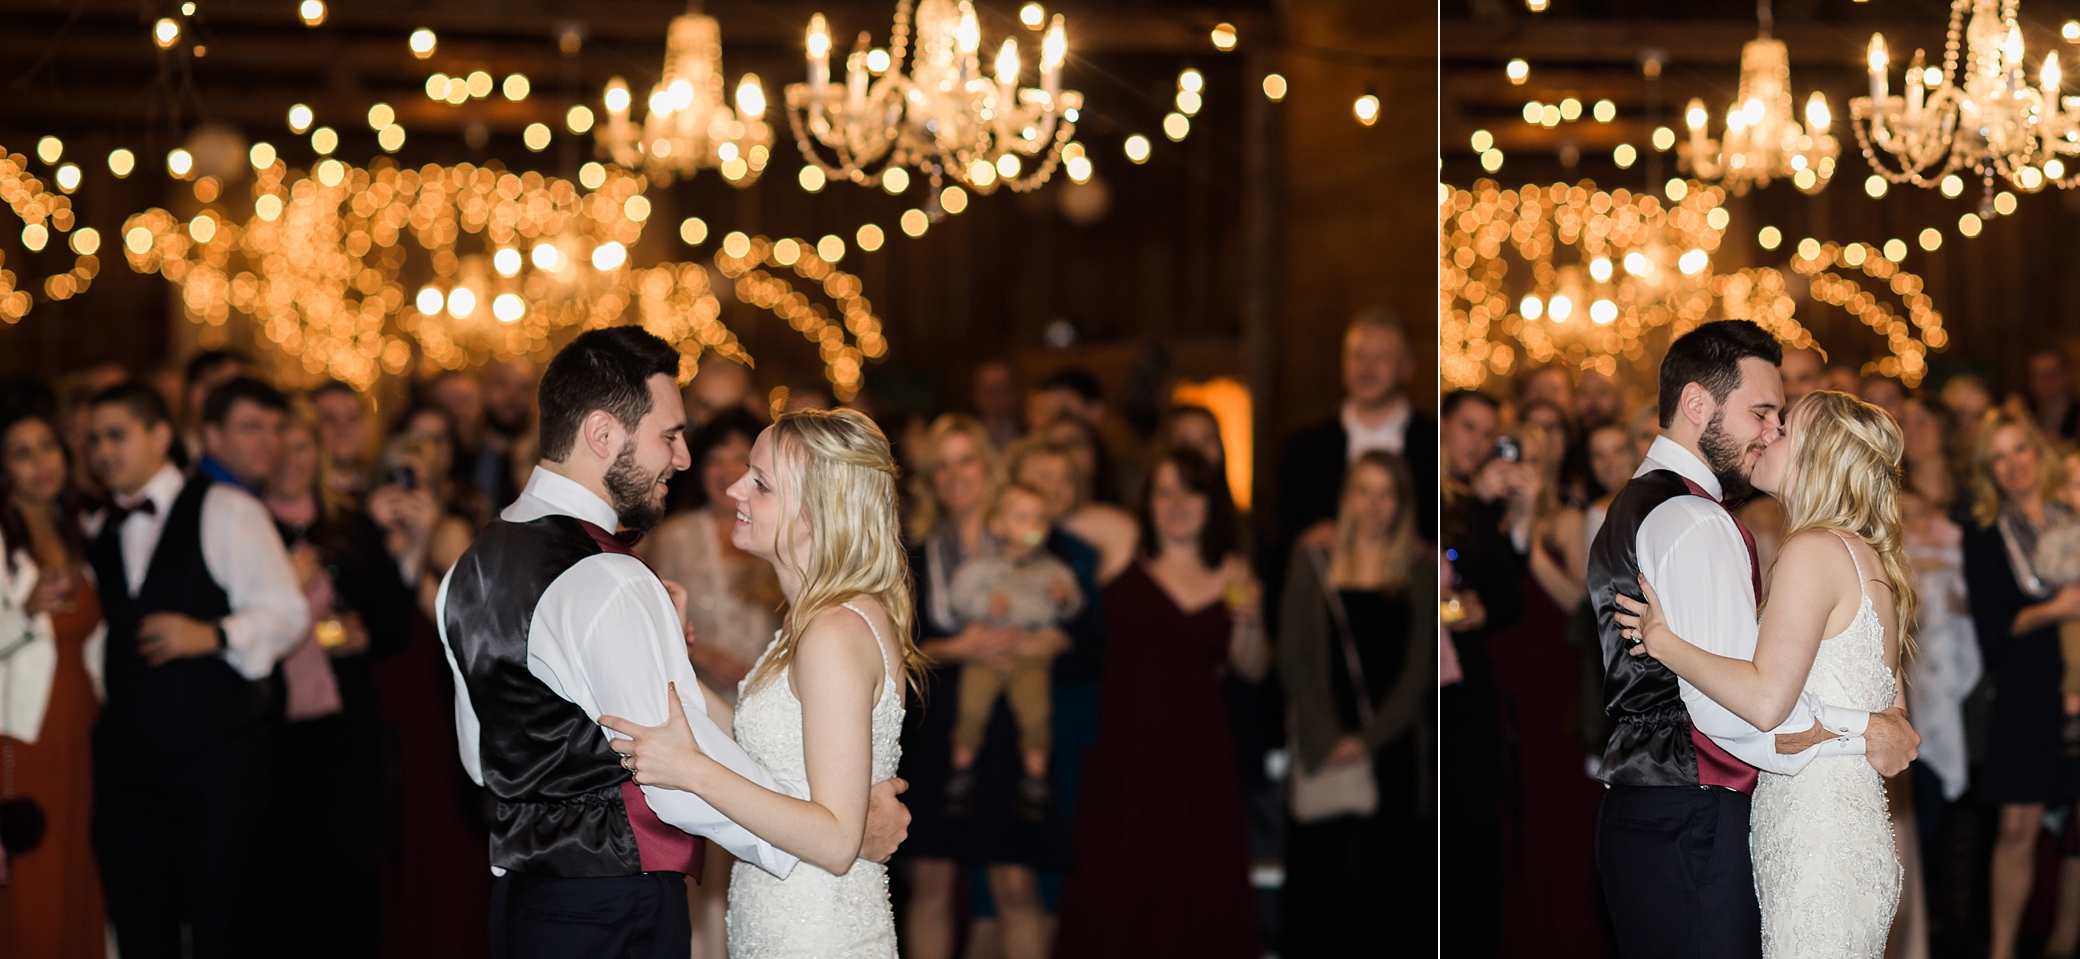 Bride and Groom First Dance | Megan Montalvo Photography 